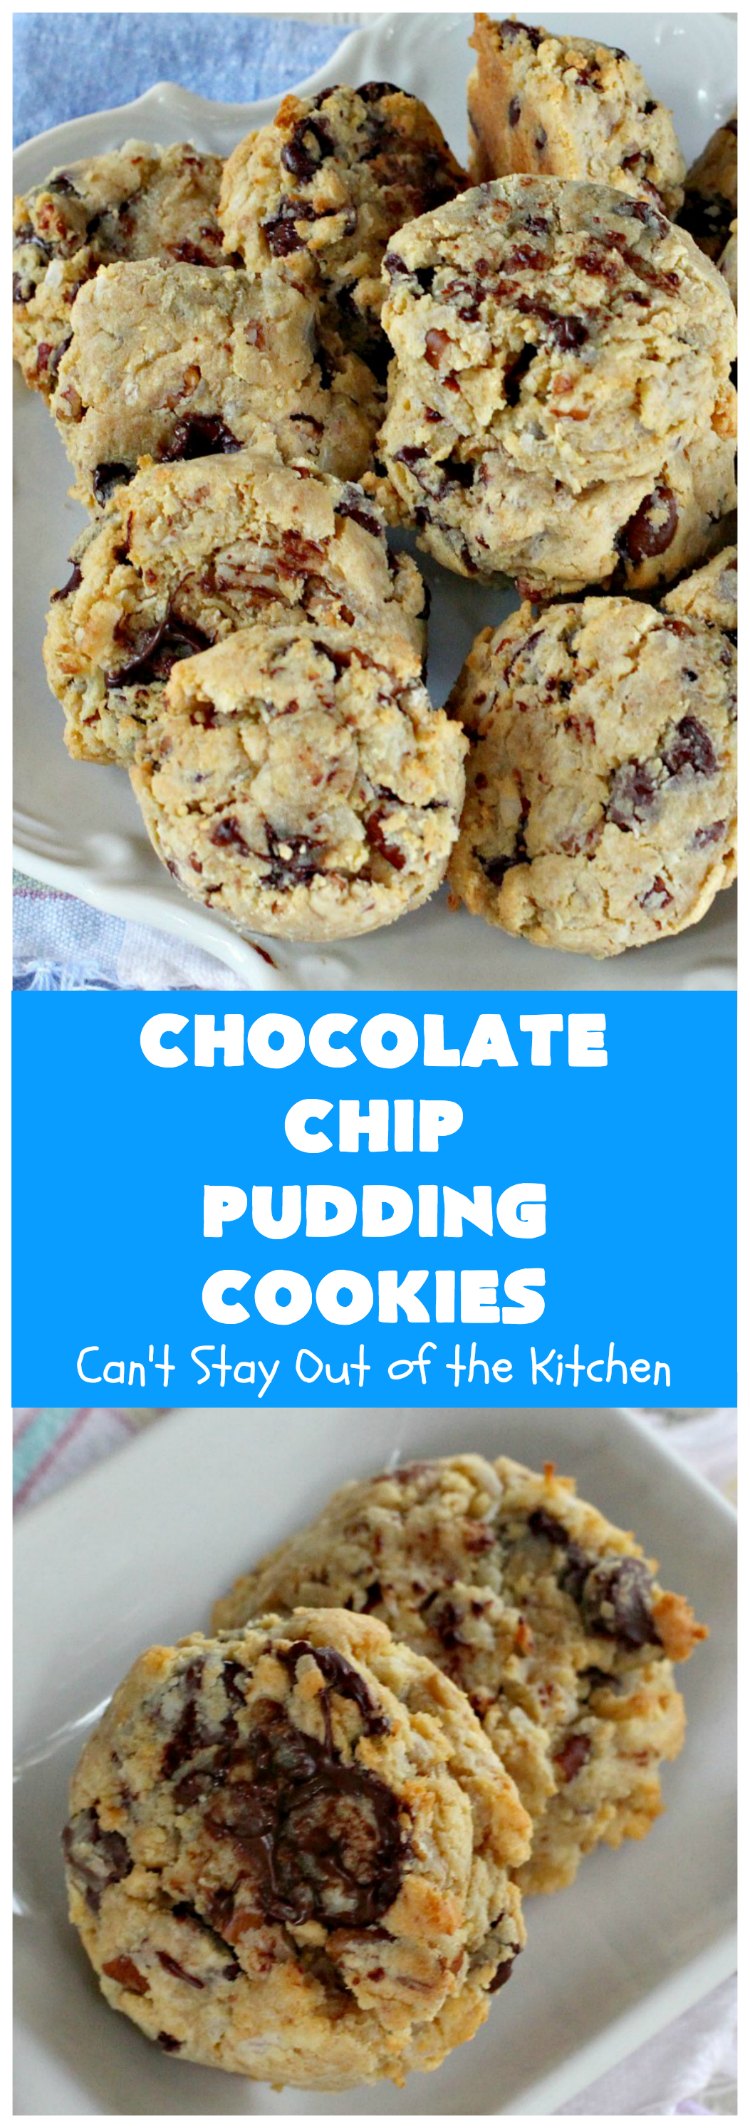 Chocolate Chip Pudding Cookies | Can't Stay Out of the Kitchen | these fabulous #cookies start with the famous #NanaimoBars so they're rich and decadent. They're filled with #chocolate chips, #coconut, #GrahamCracker crumbs, #pecans & buttercream icing made from vanilla pudding! Terrific for #tailgating or #holiday parties. #ChocolateChipPuddingCookies